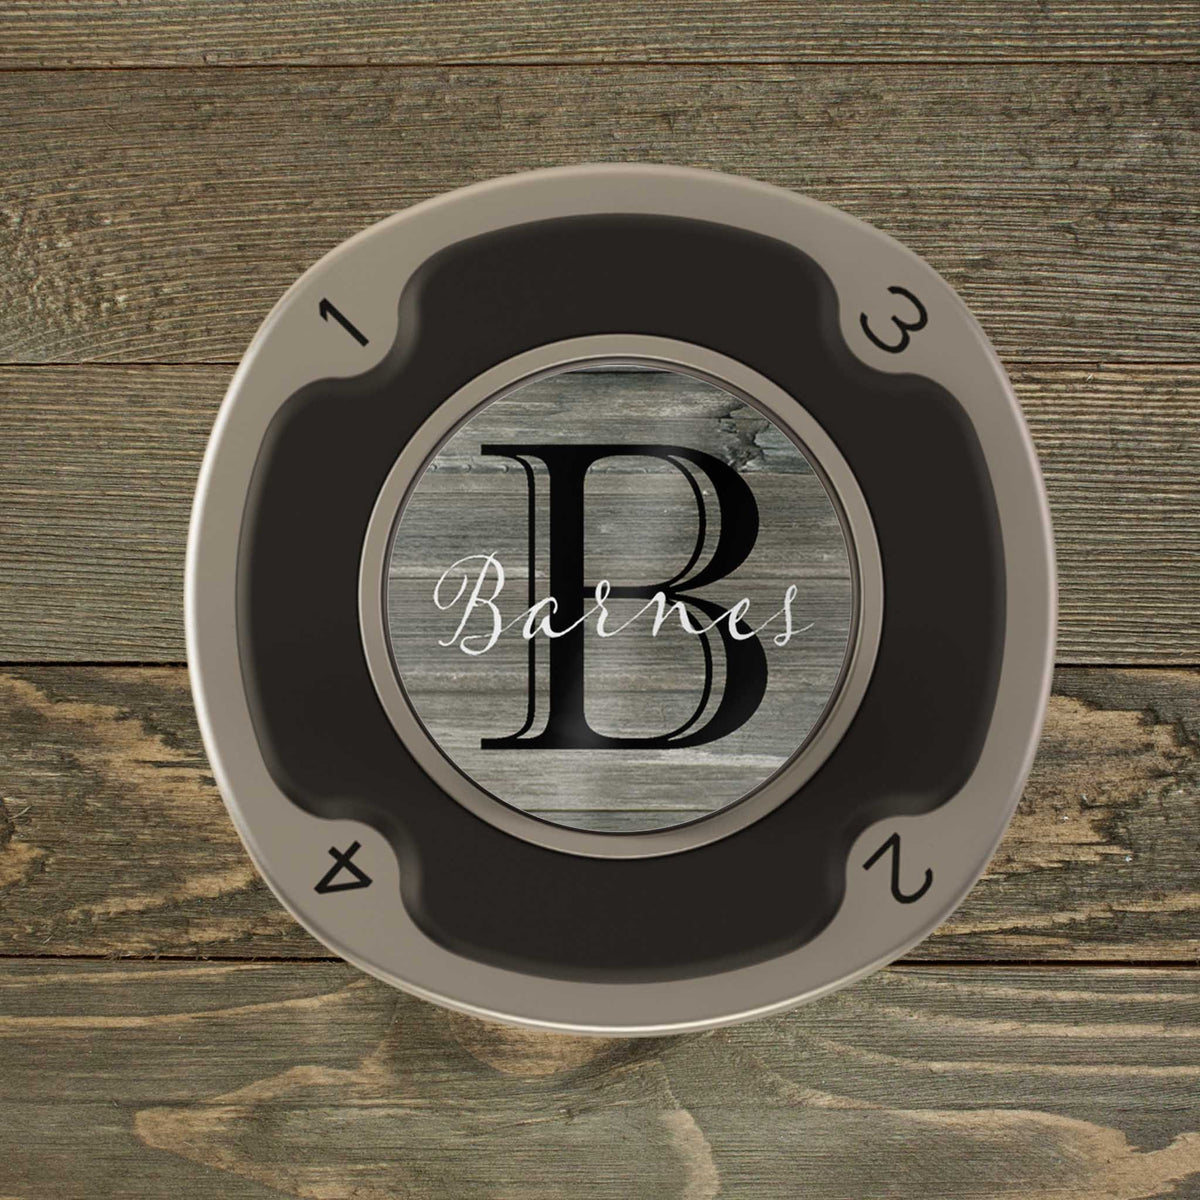 Personalized PitchFix MultiMarker Tool | Custom Ball Markers | Golf Gifts | Rustic Monogram